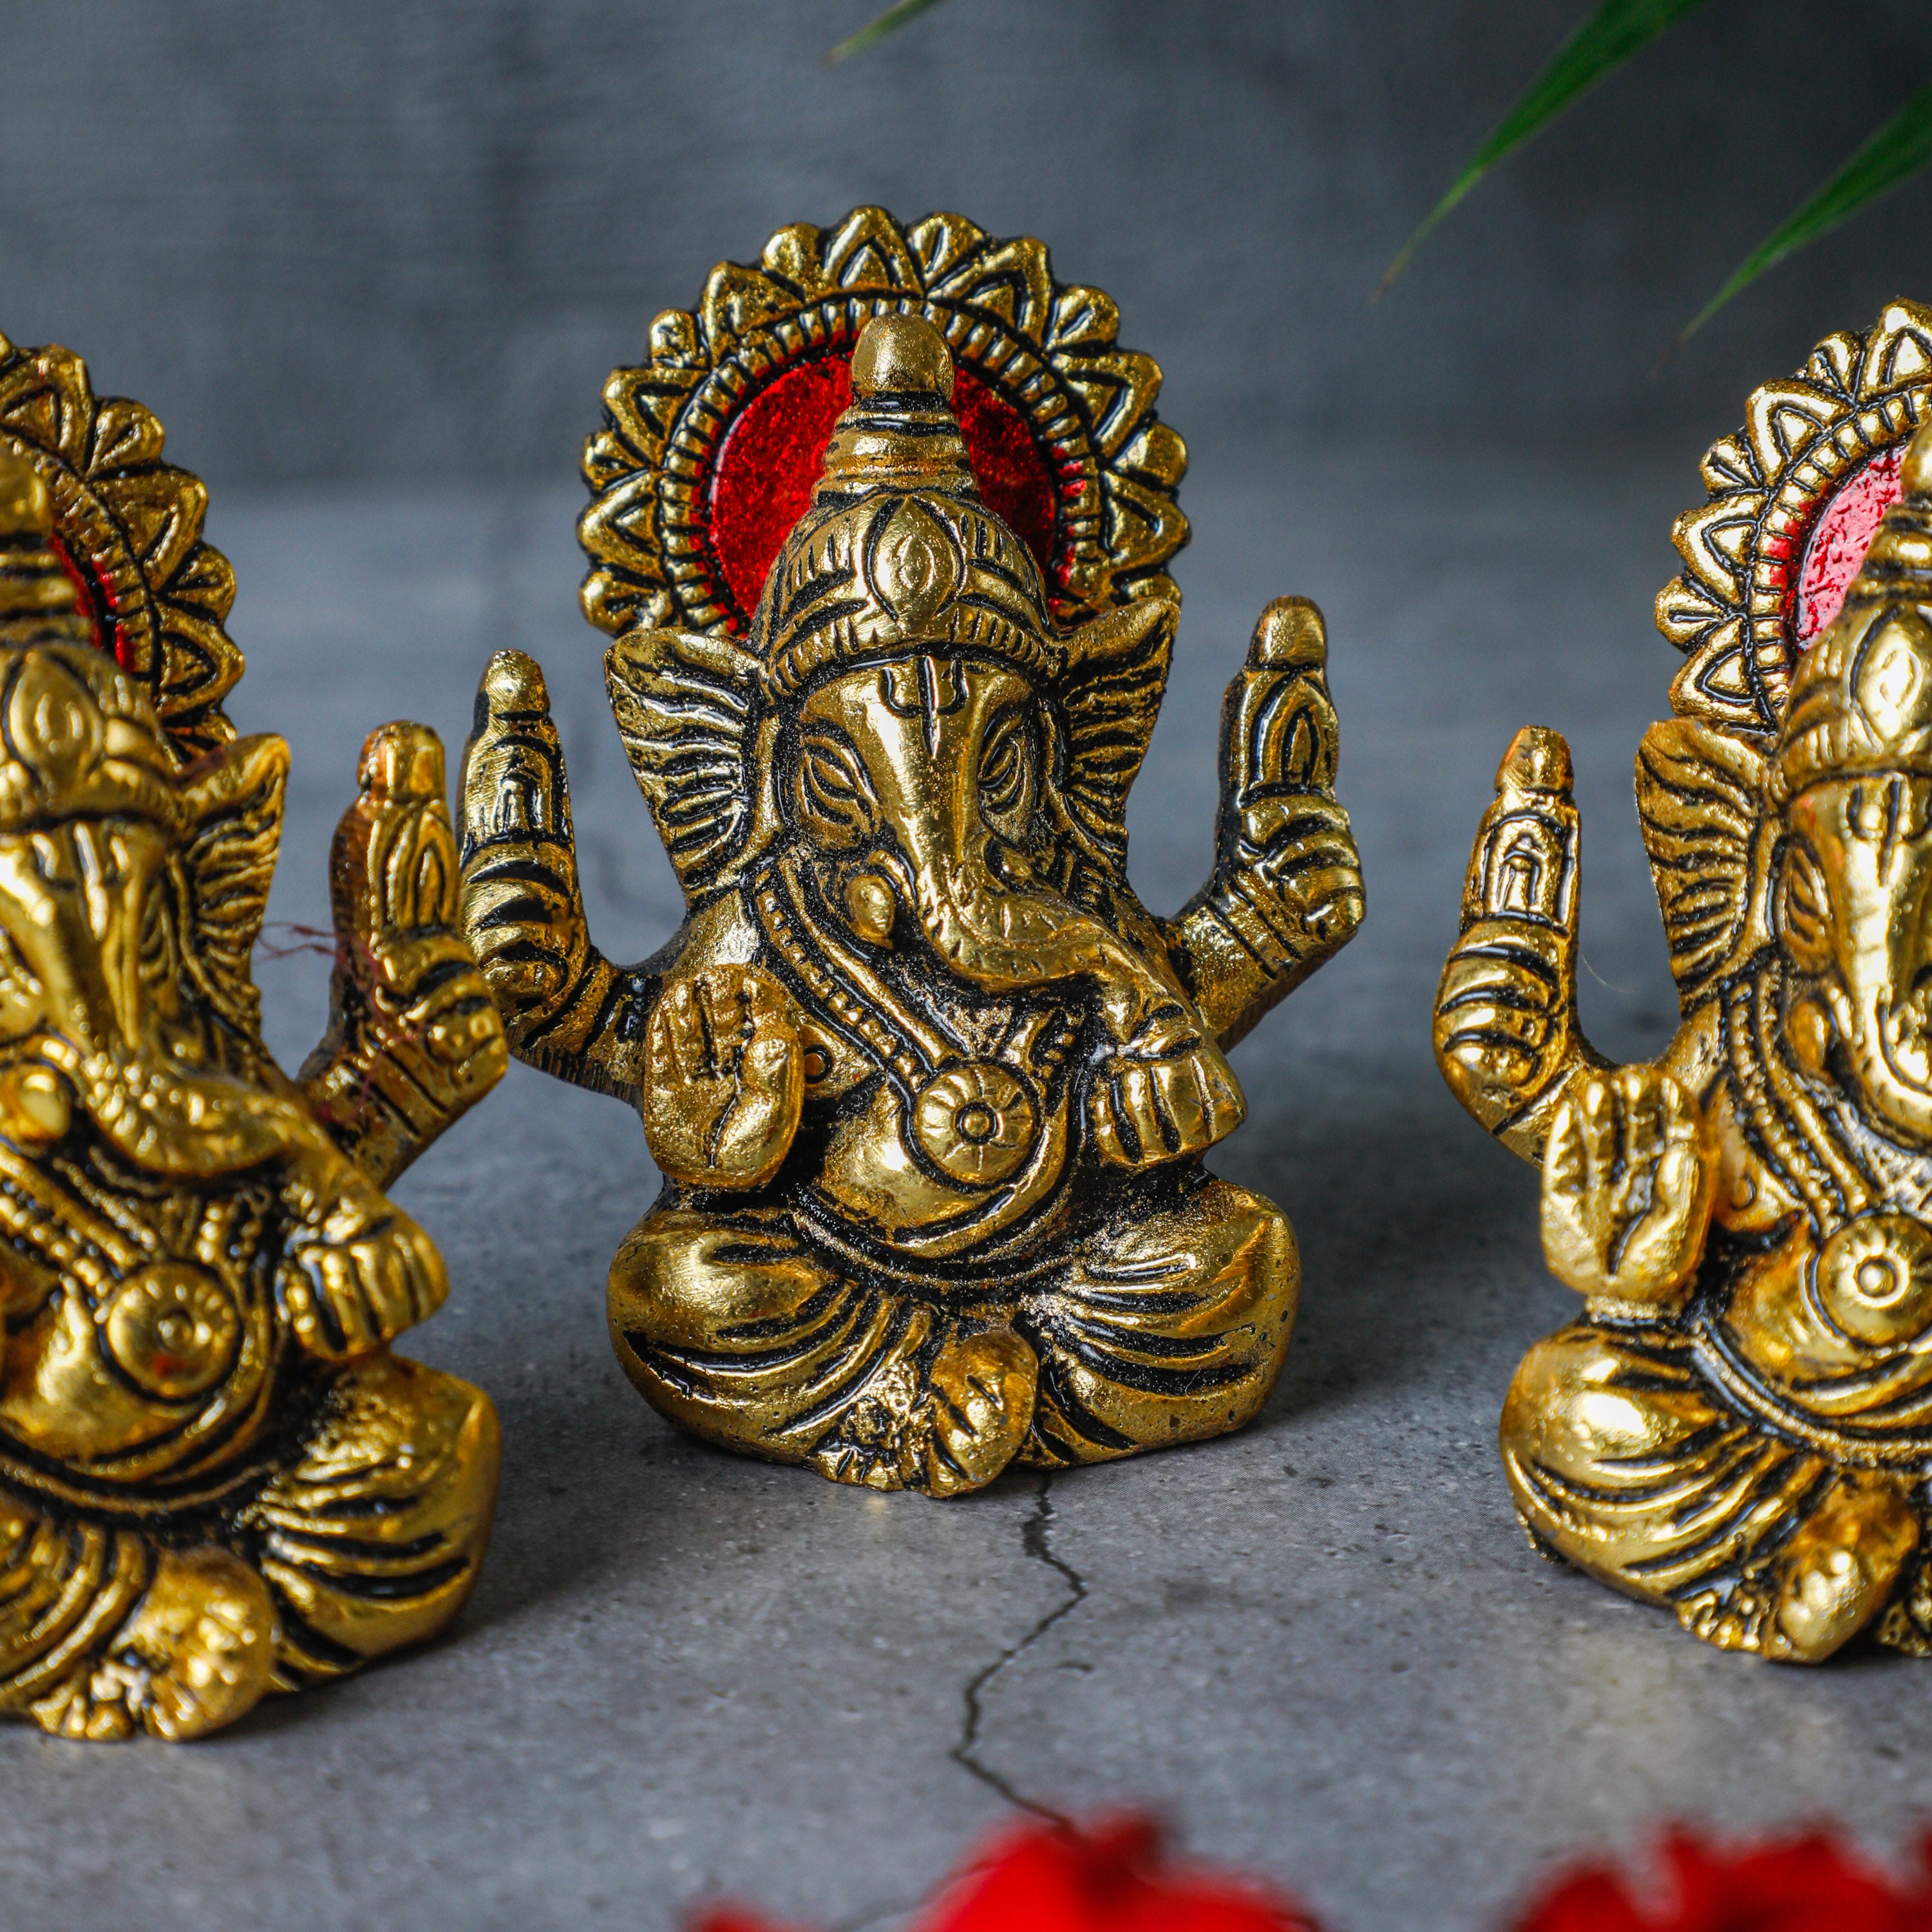 share blessings with loved ones by gifting it on weddings, house warmings, return gifts, or during devotional poojas